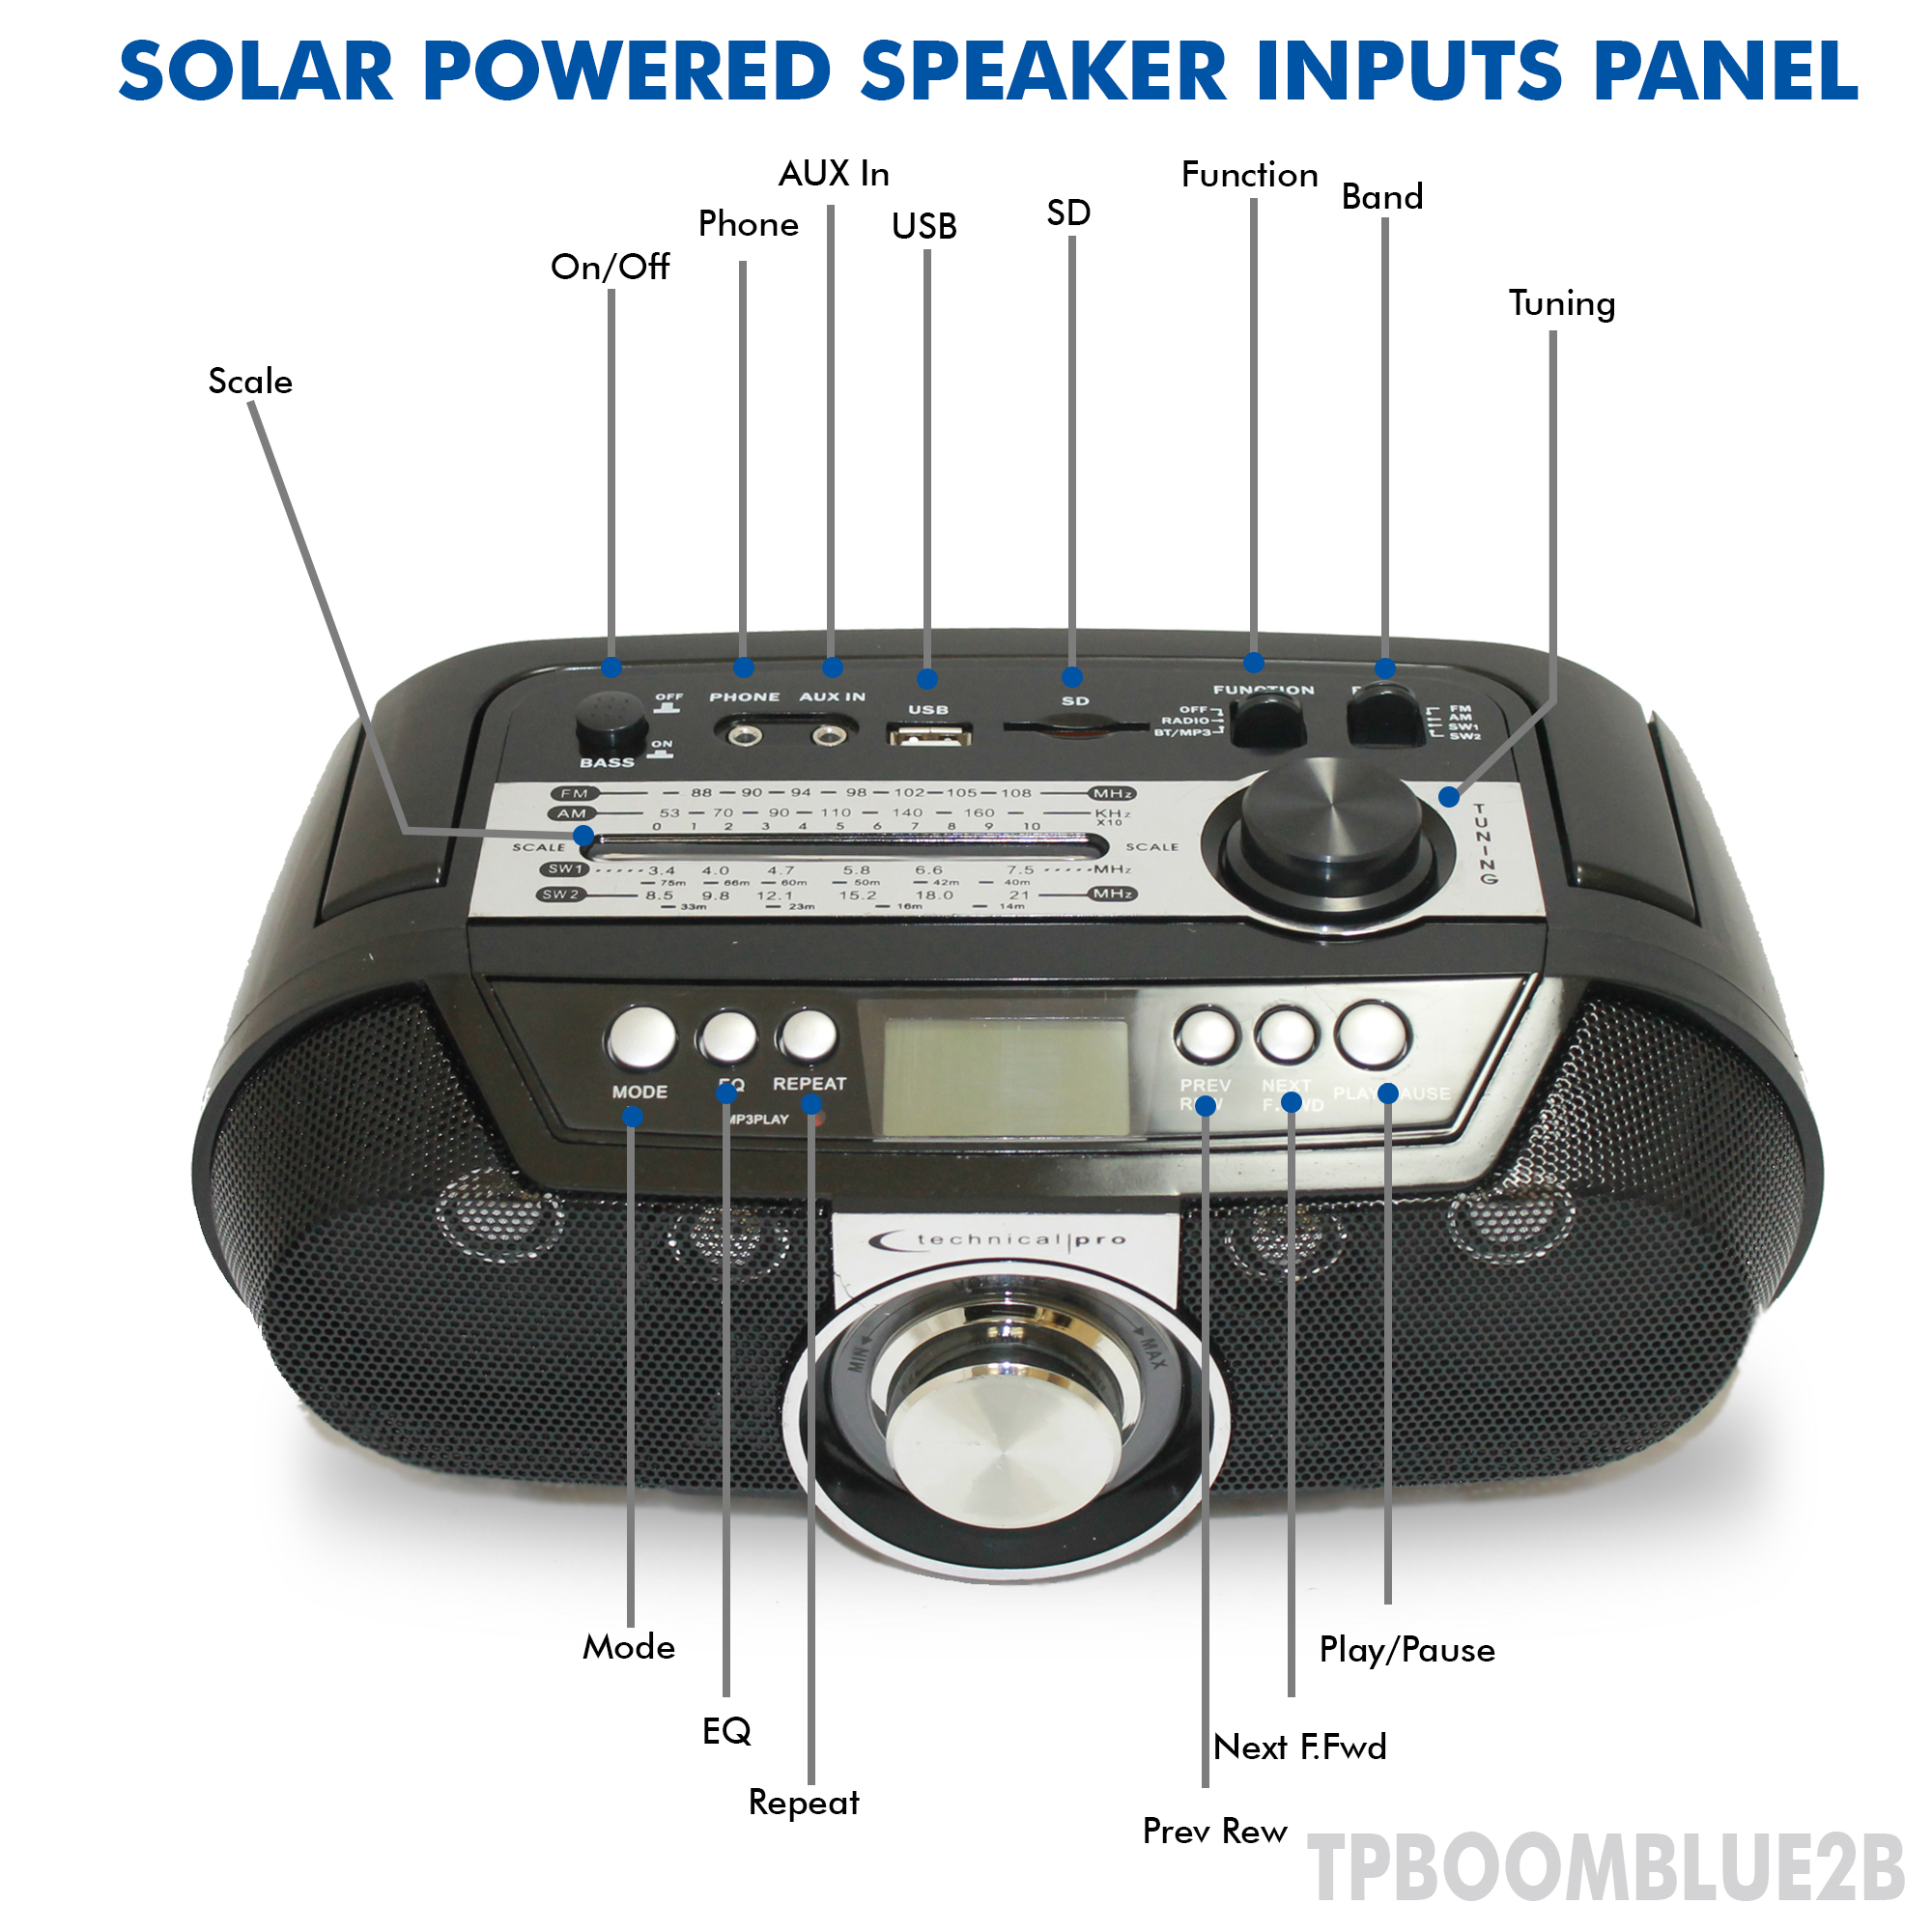 Technical Pro Portable Rechargeable Bluetooth Solar Powered Speaker w/ USB / SD Inputs, Perfect On-The-Go Speaker - image 2 of 6